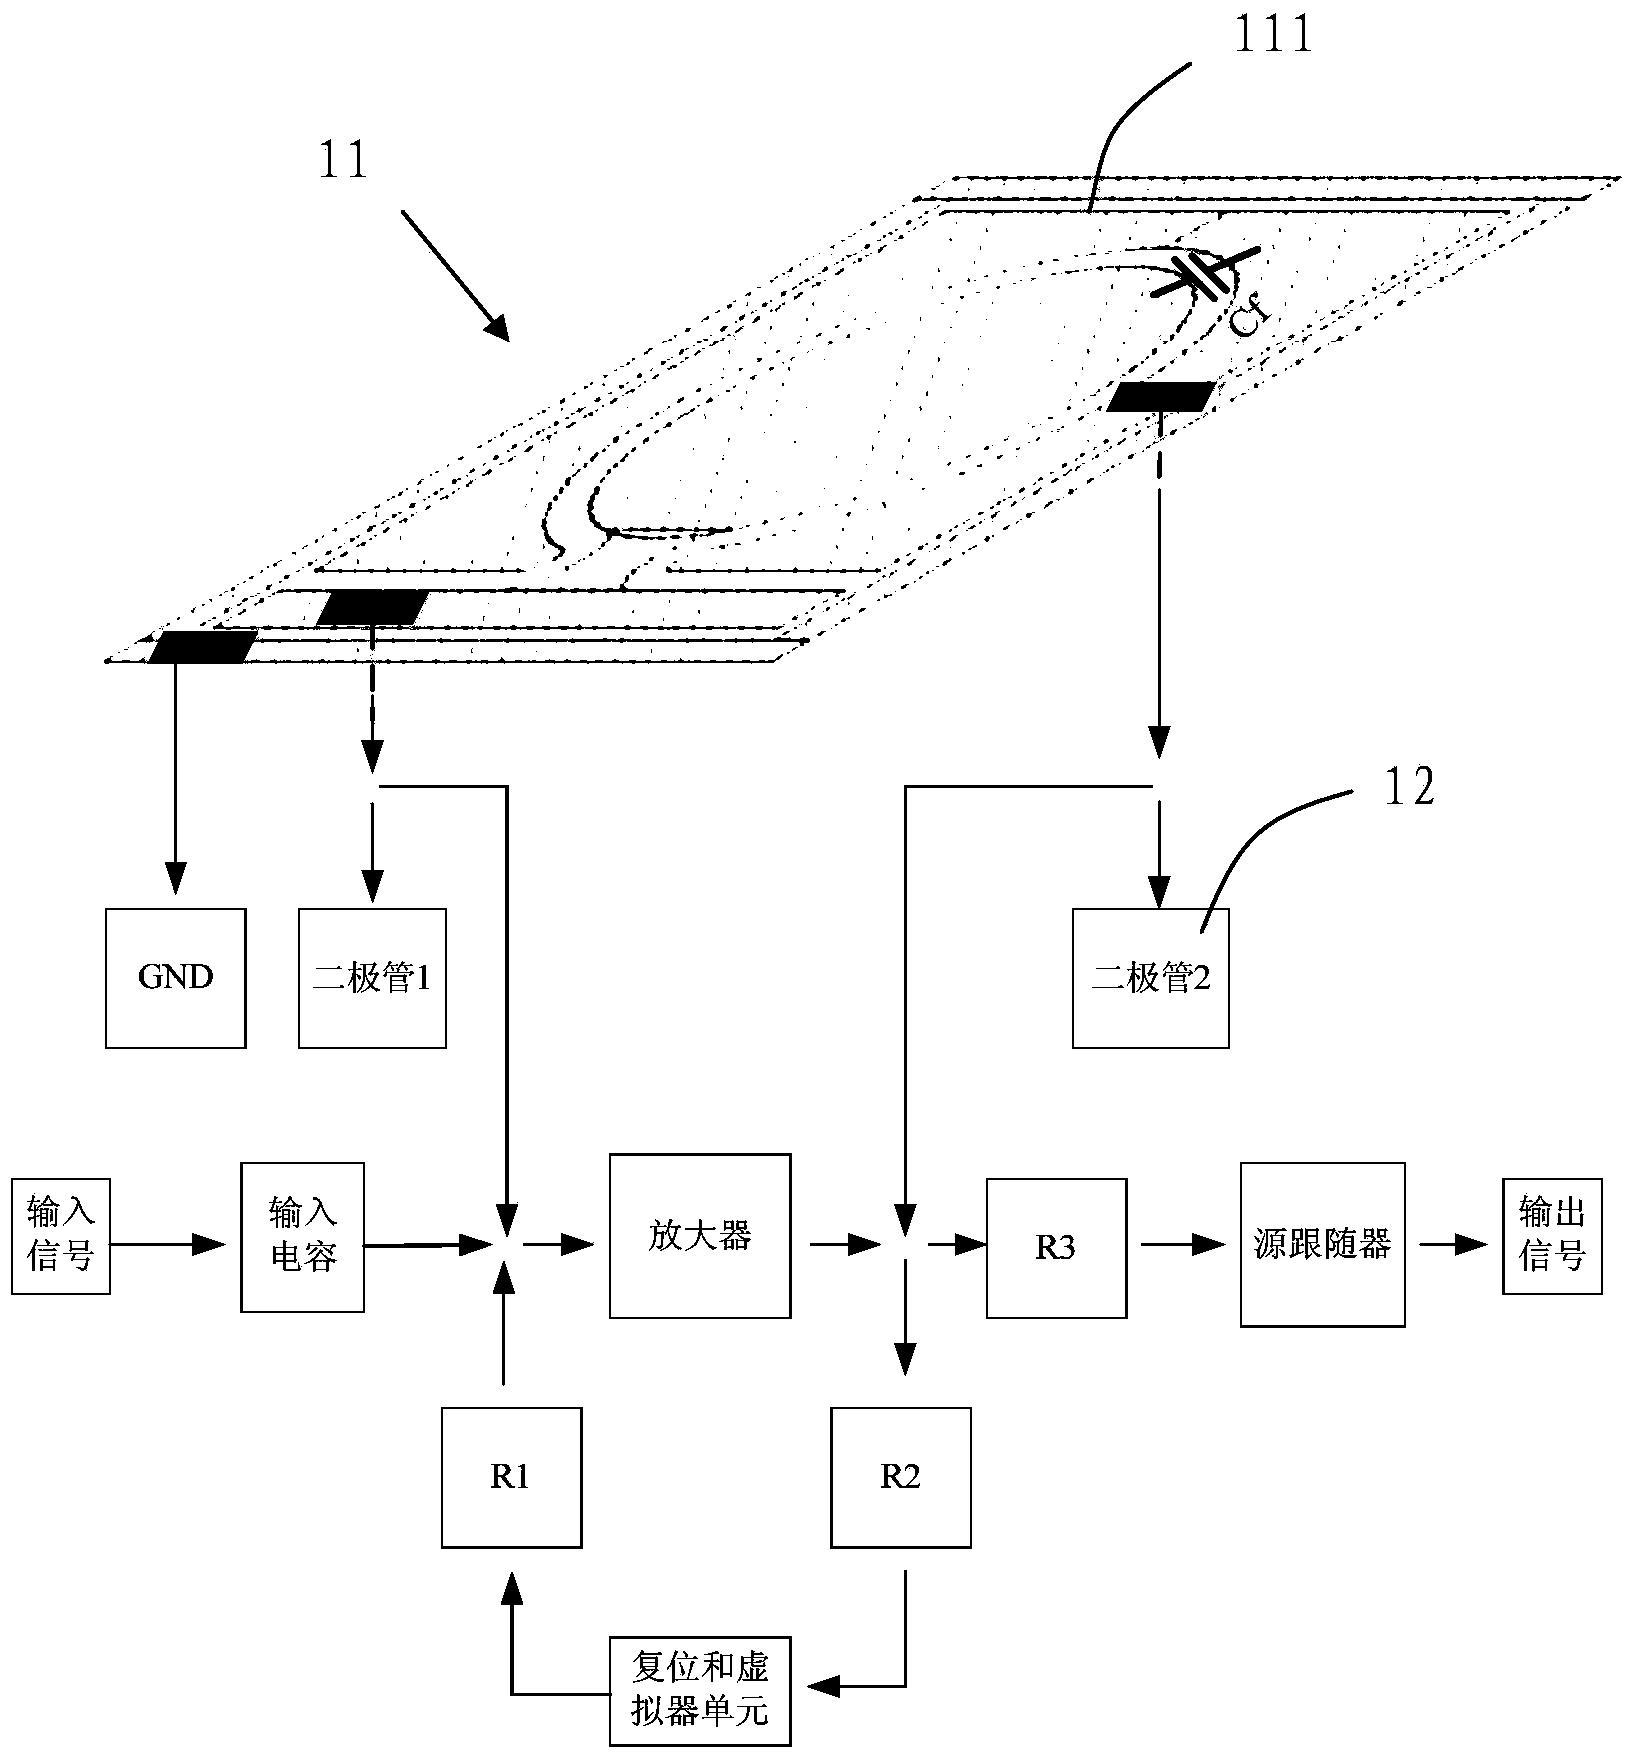 Biological recognition sensing device based on electronic static discharge (ESD) protection